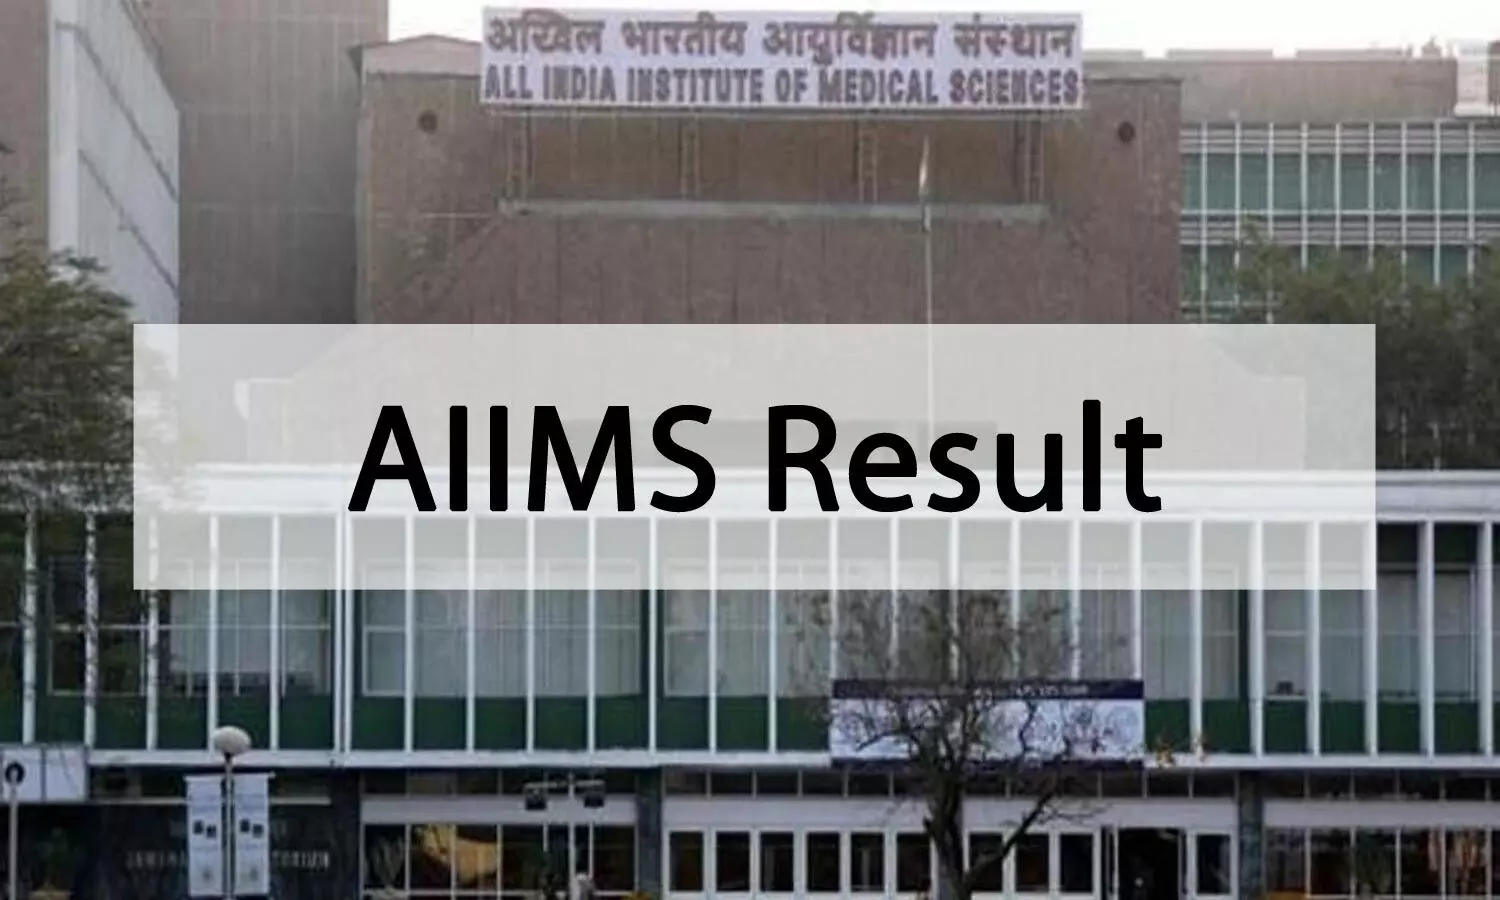 AIIMS publishes Result of Stage II Entrance Exam for DM, MCh, MD Hospital Administration Courses July 2020